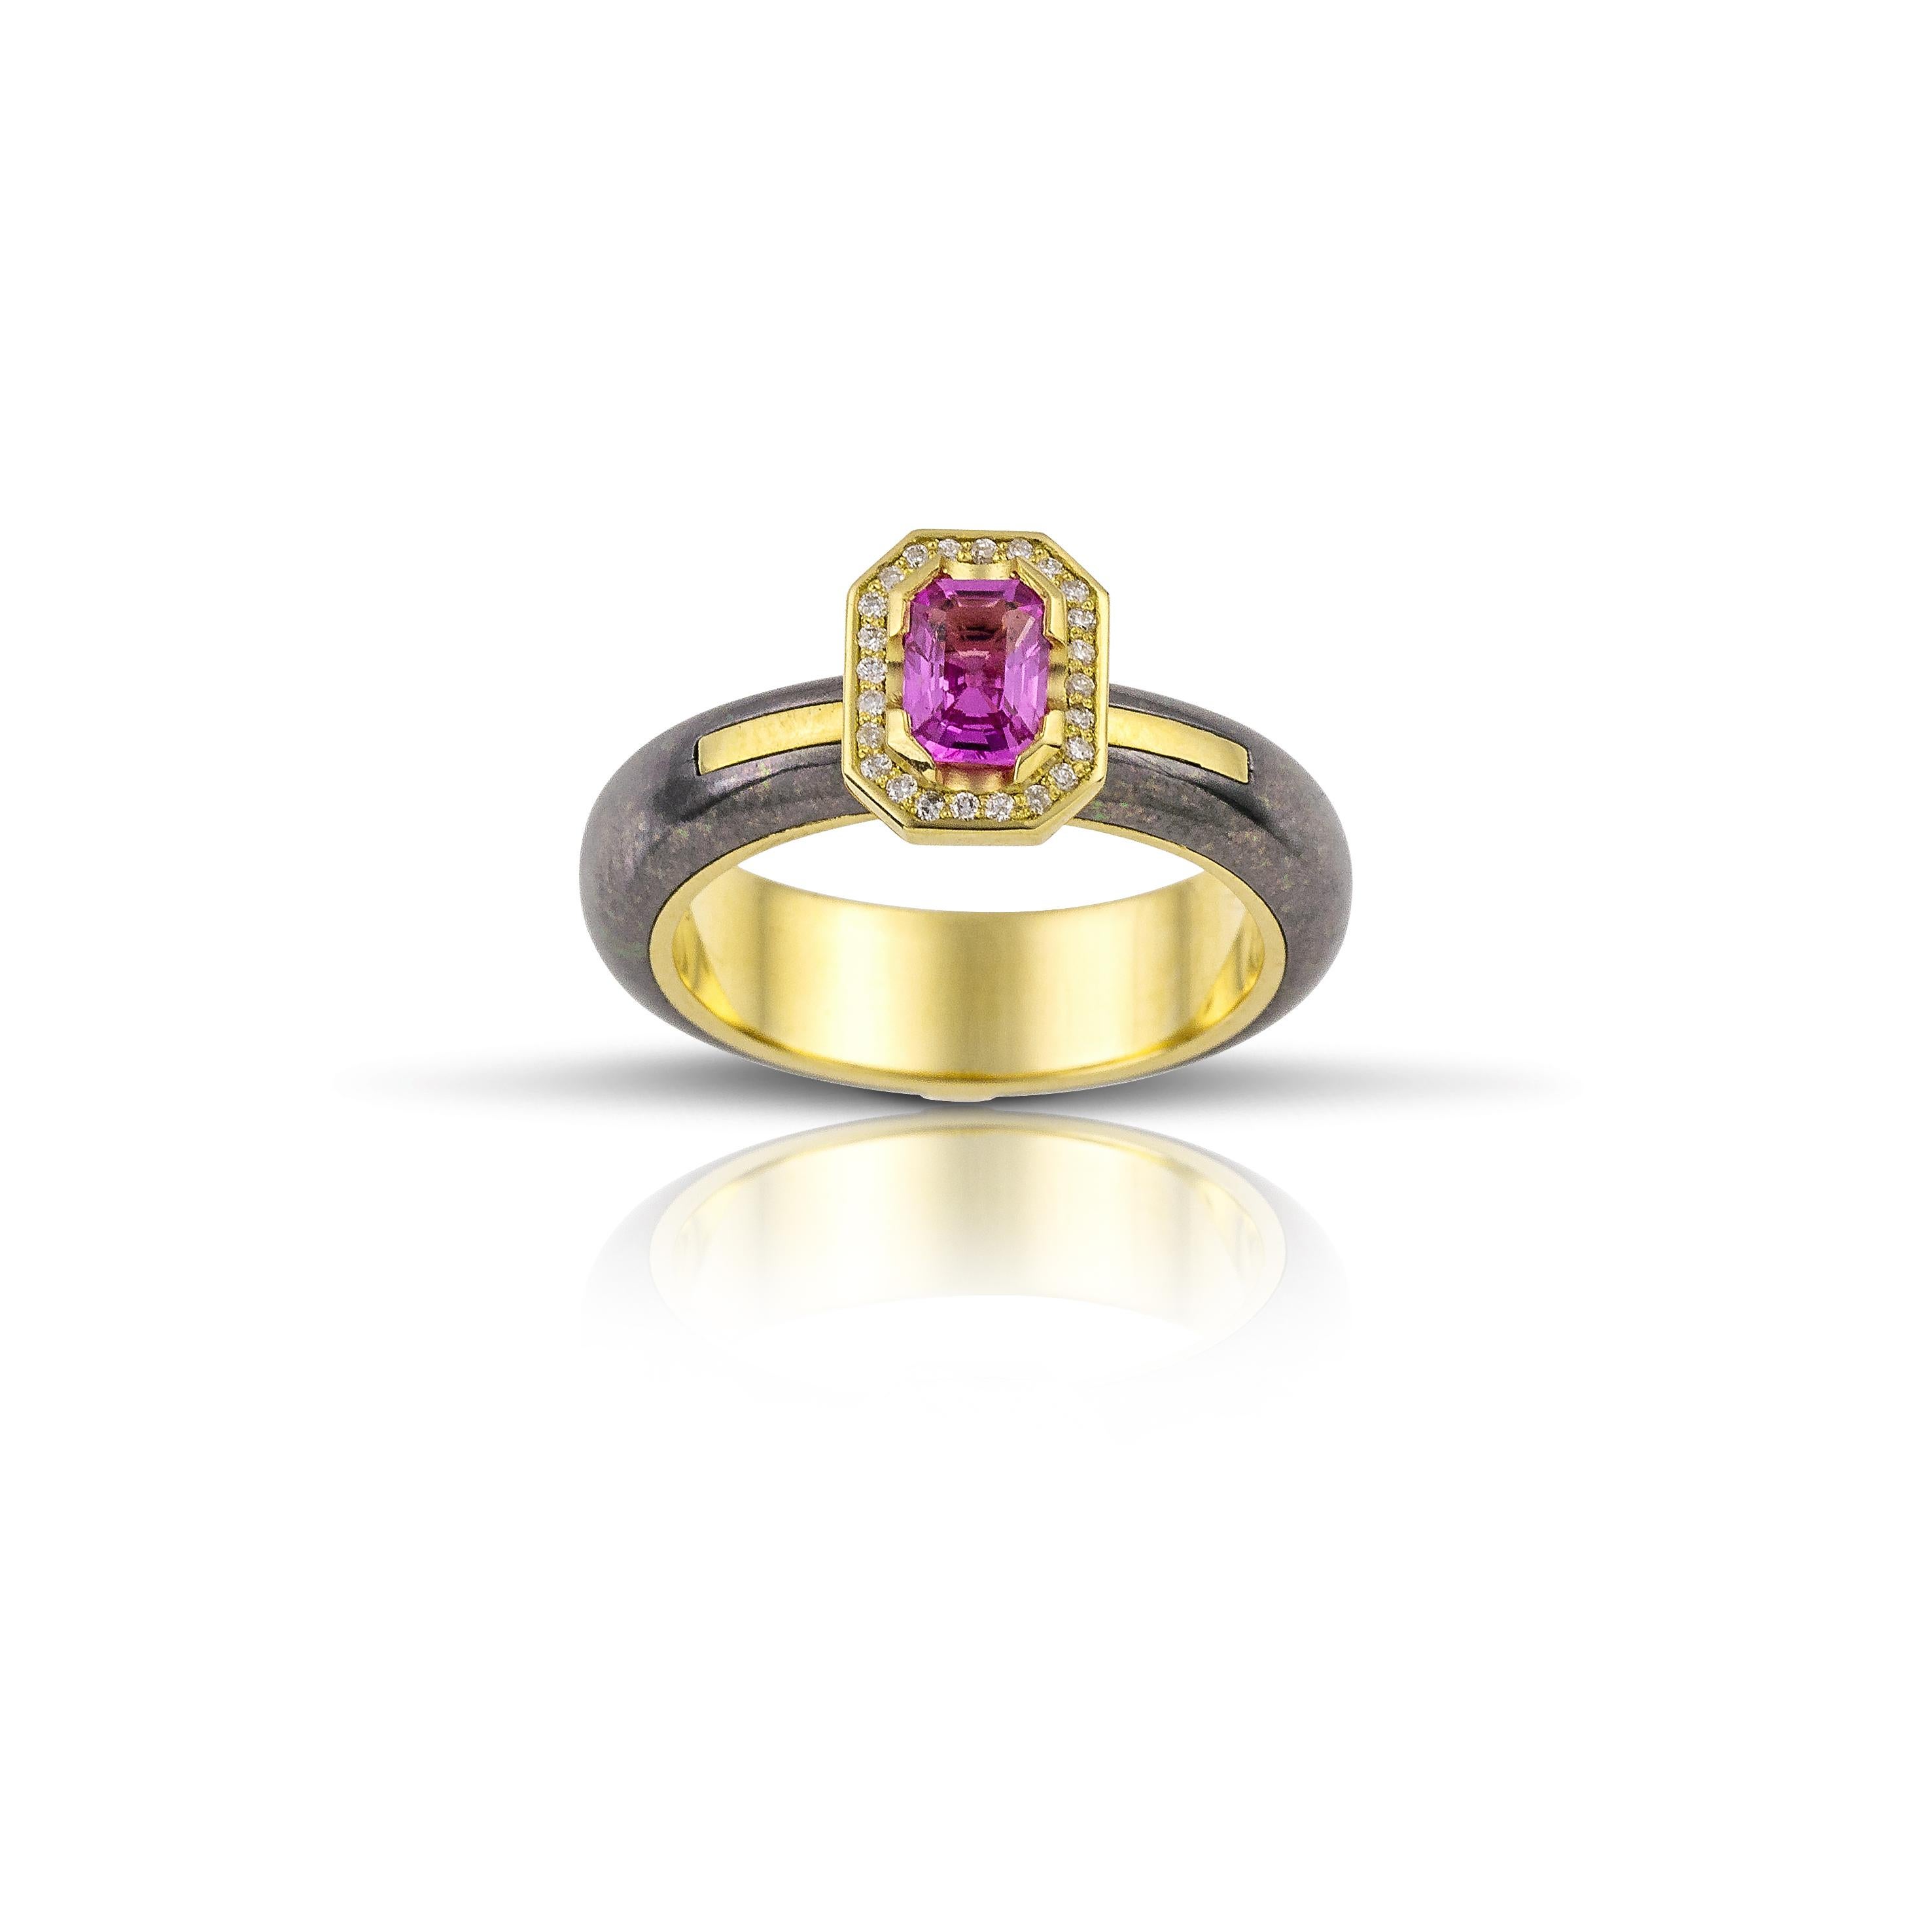 Pink Sapphire Alternative Engagement Titanium Ring by Vasilis Giampouras at Second Petale Gallery
Celebrate love with our alternative engagement ring. It is a touch of modern sophistication, featuring a stunning pink sapphire in an emerald cut,